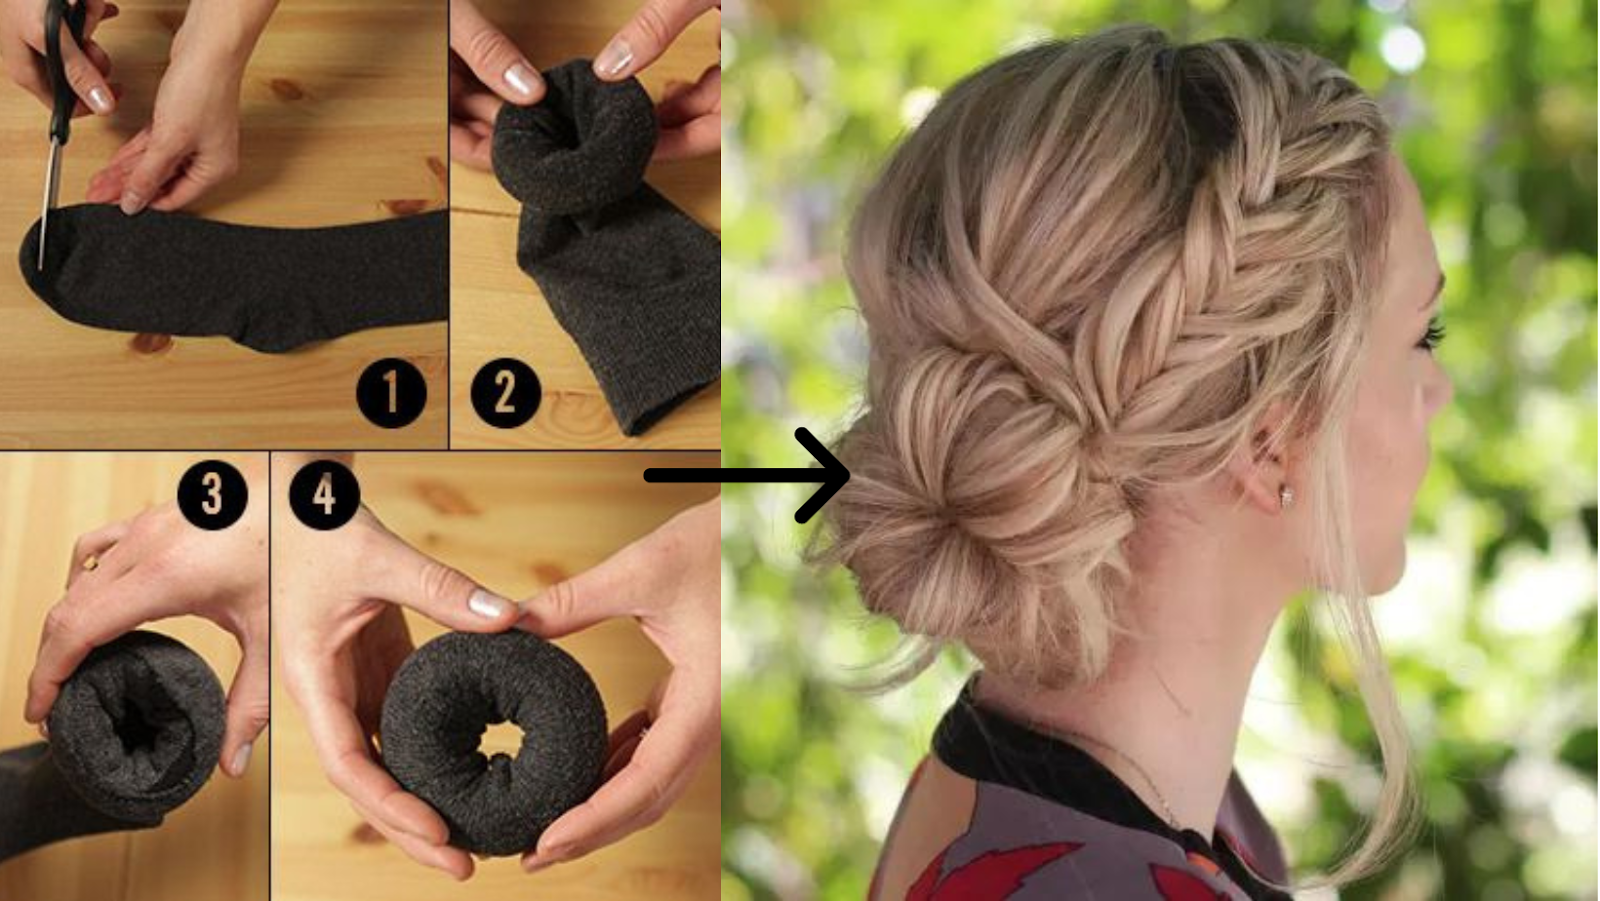 How To: Heatless Curls with Household Items - YouTube